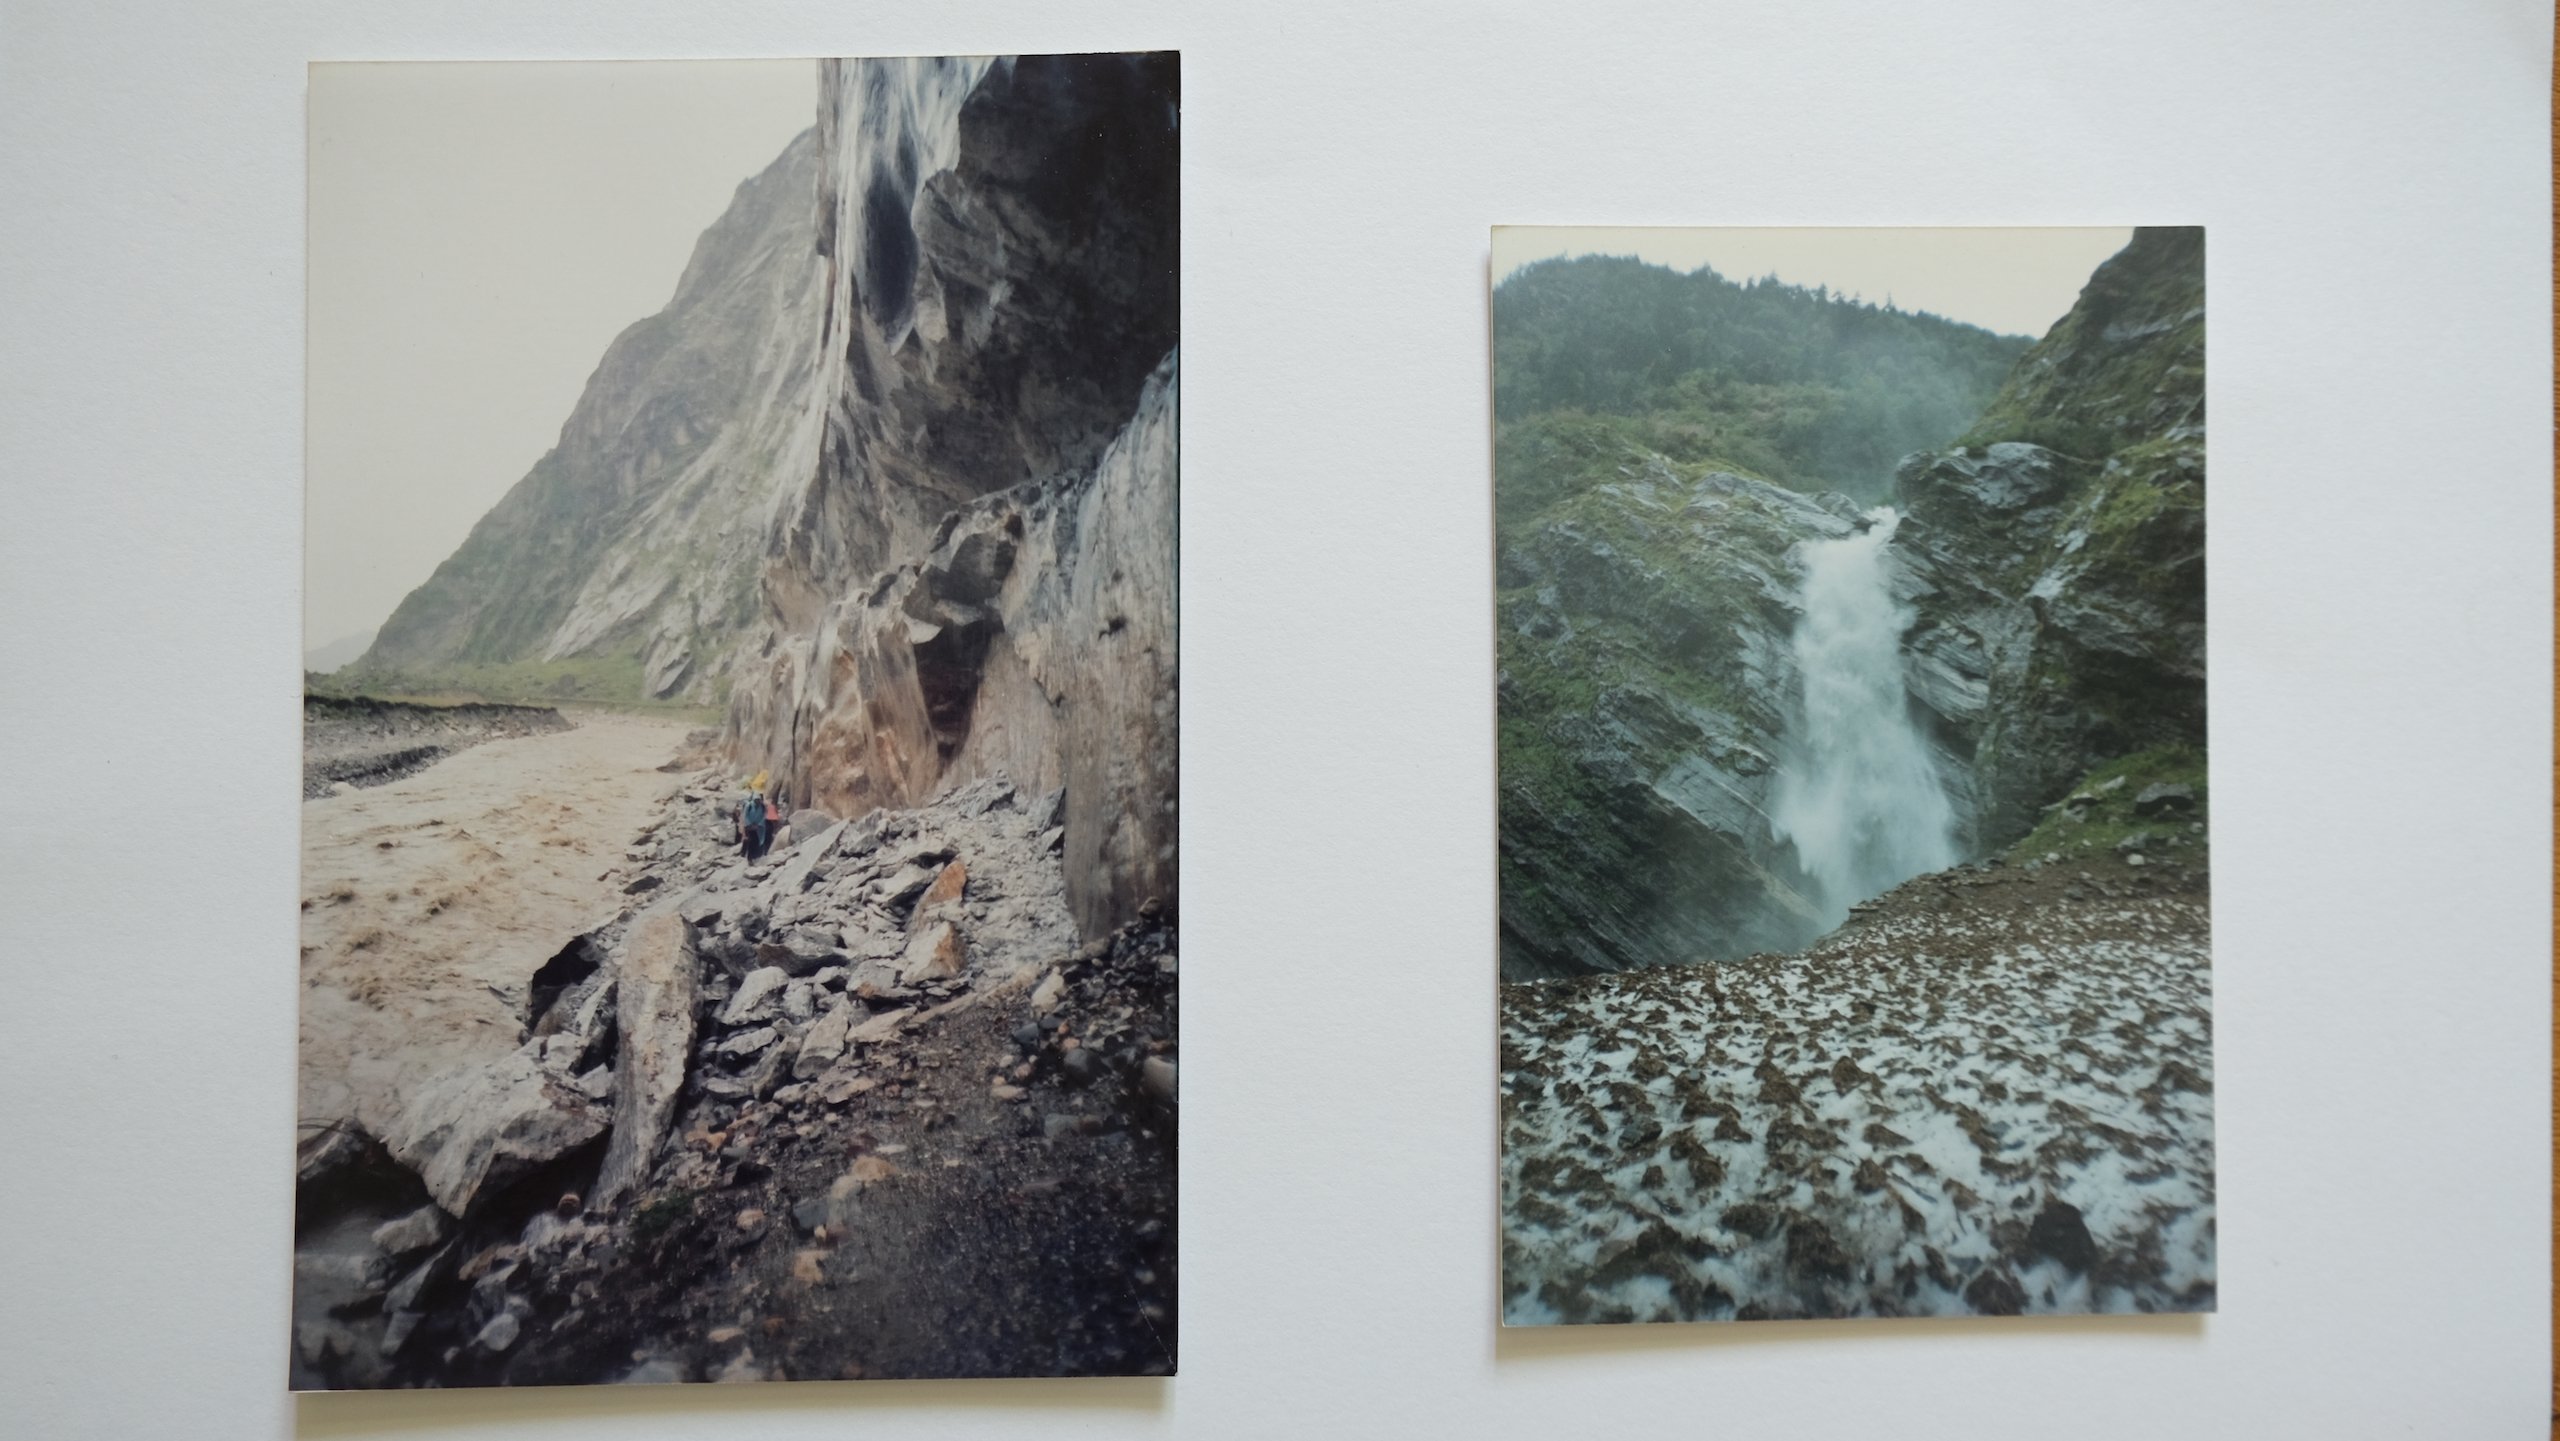 Photographs taken by guide Jagdish Bhatt of trekking routes in the Johar Valley in June 2001, when there was an abundance of streams and water bodies